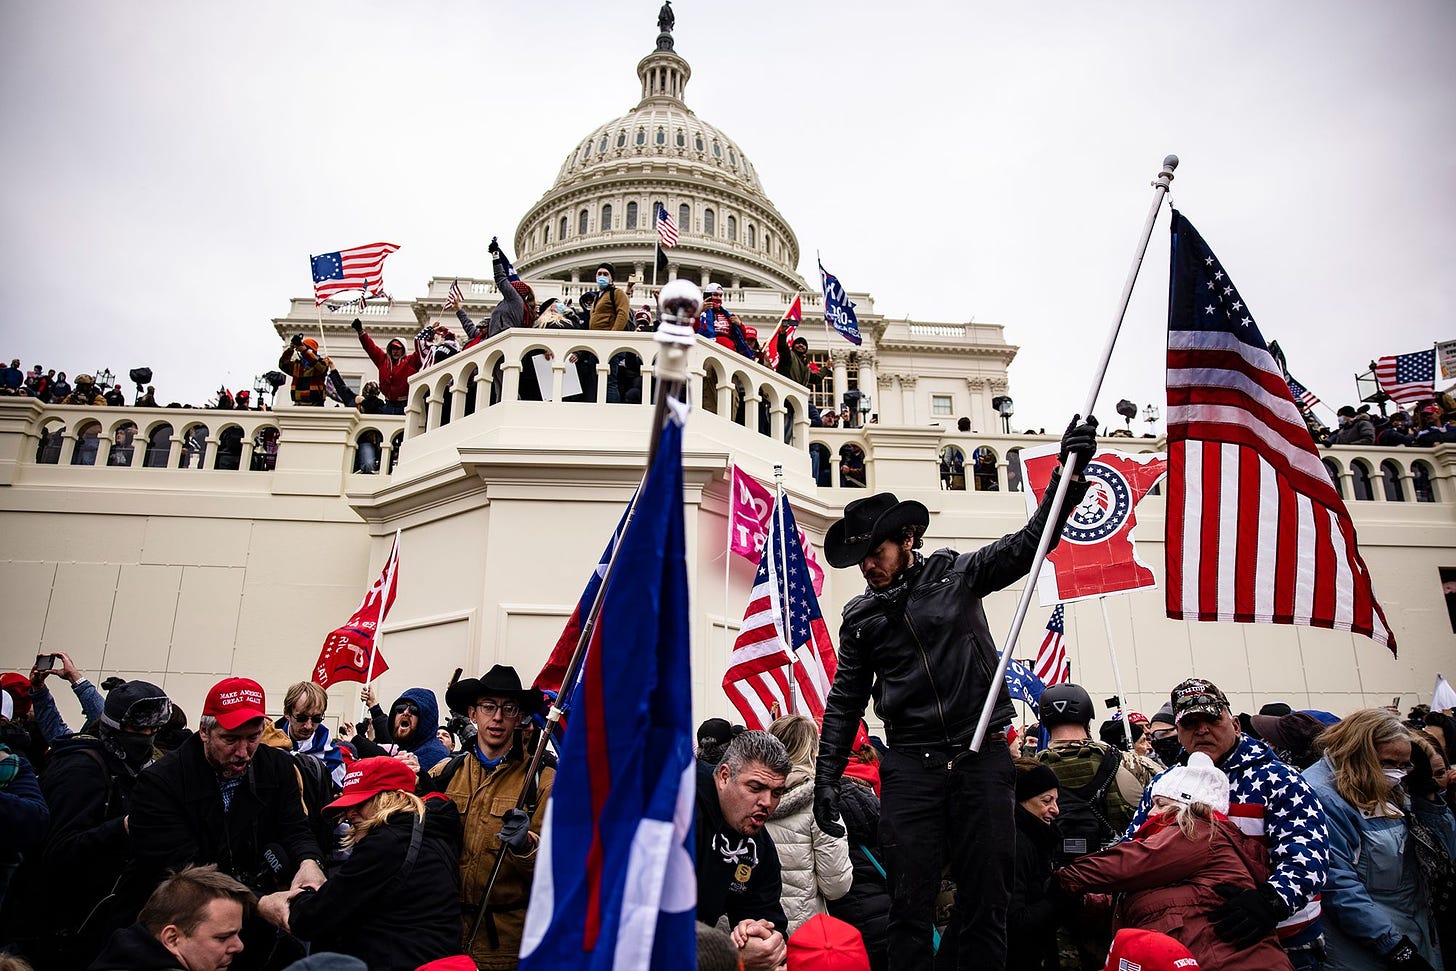 See how the Capitol Riot on January 6 unfolded